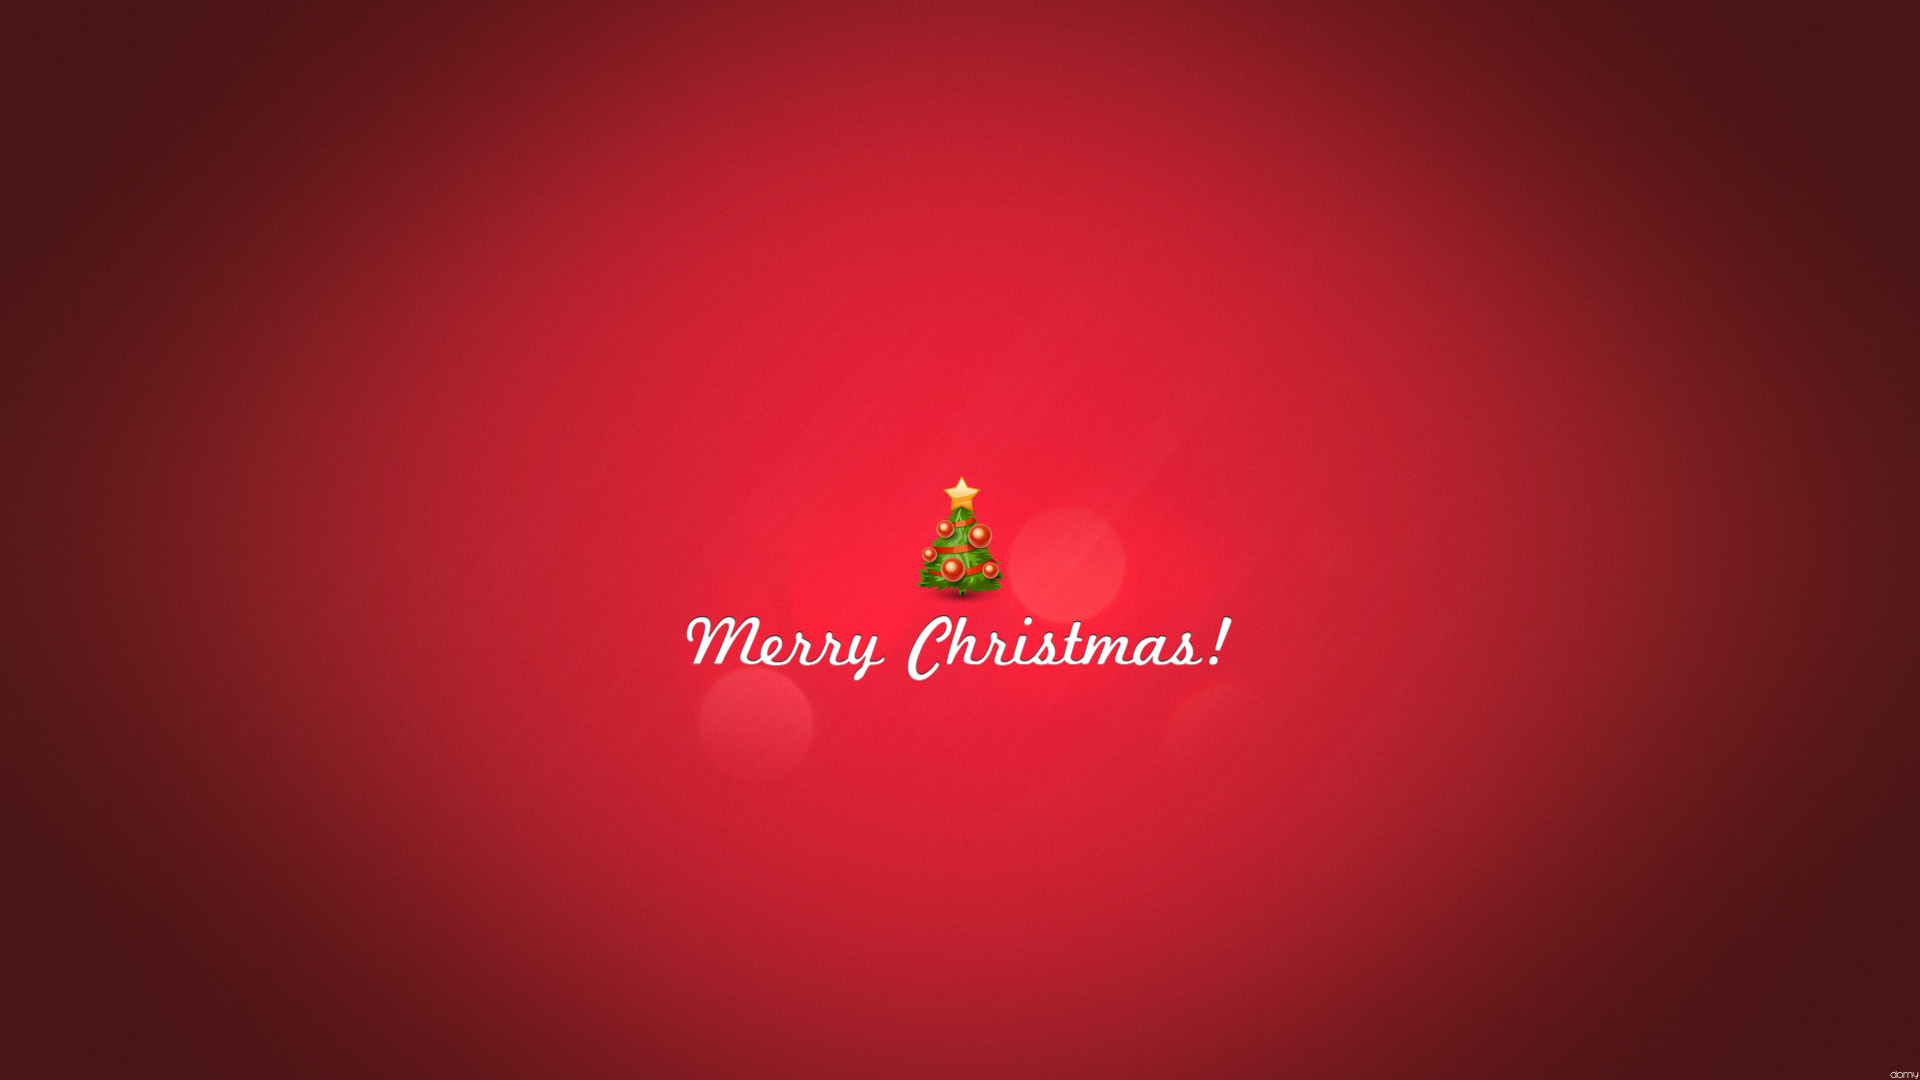 40 Free Christmas Wallpapers HD Quality 2012 Collection